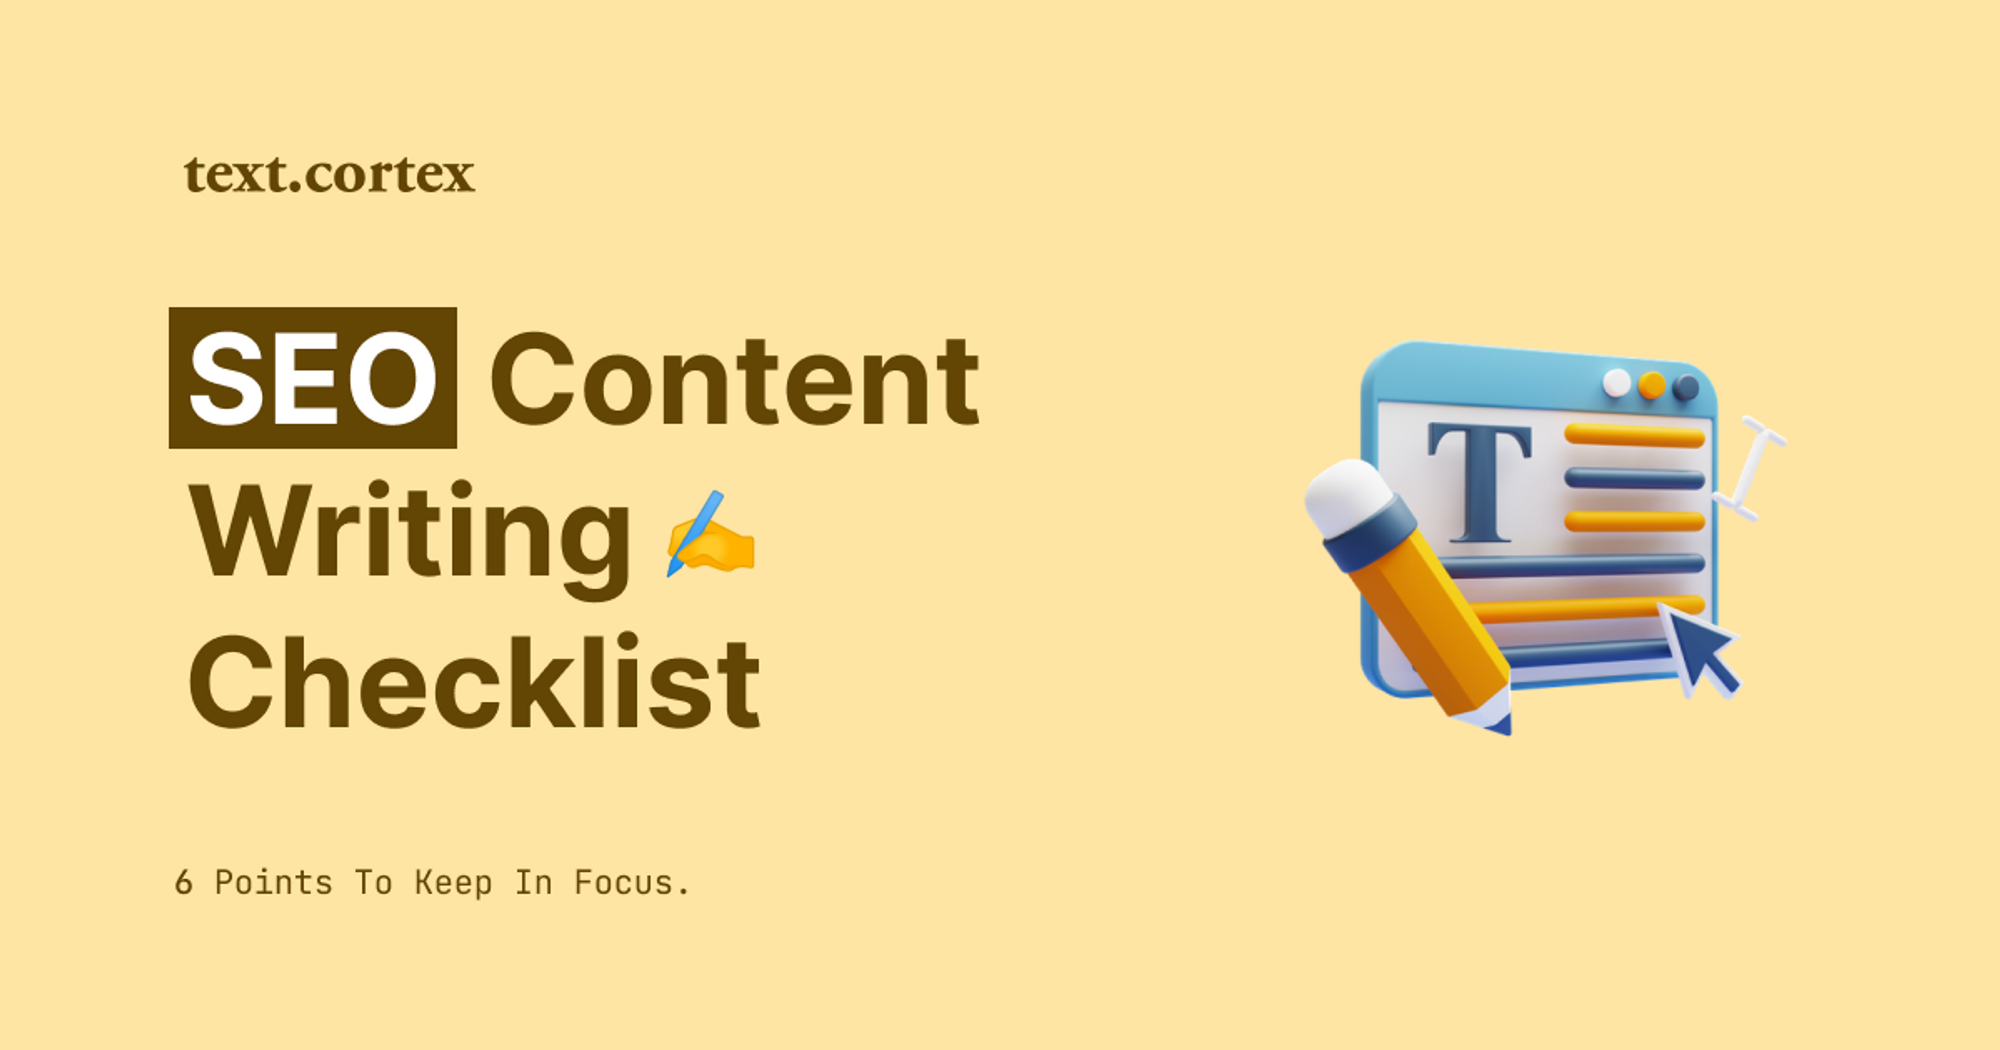 SEO Content Writing Checklist - 6 Points To Keep In Focus